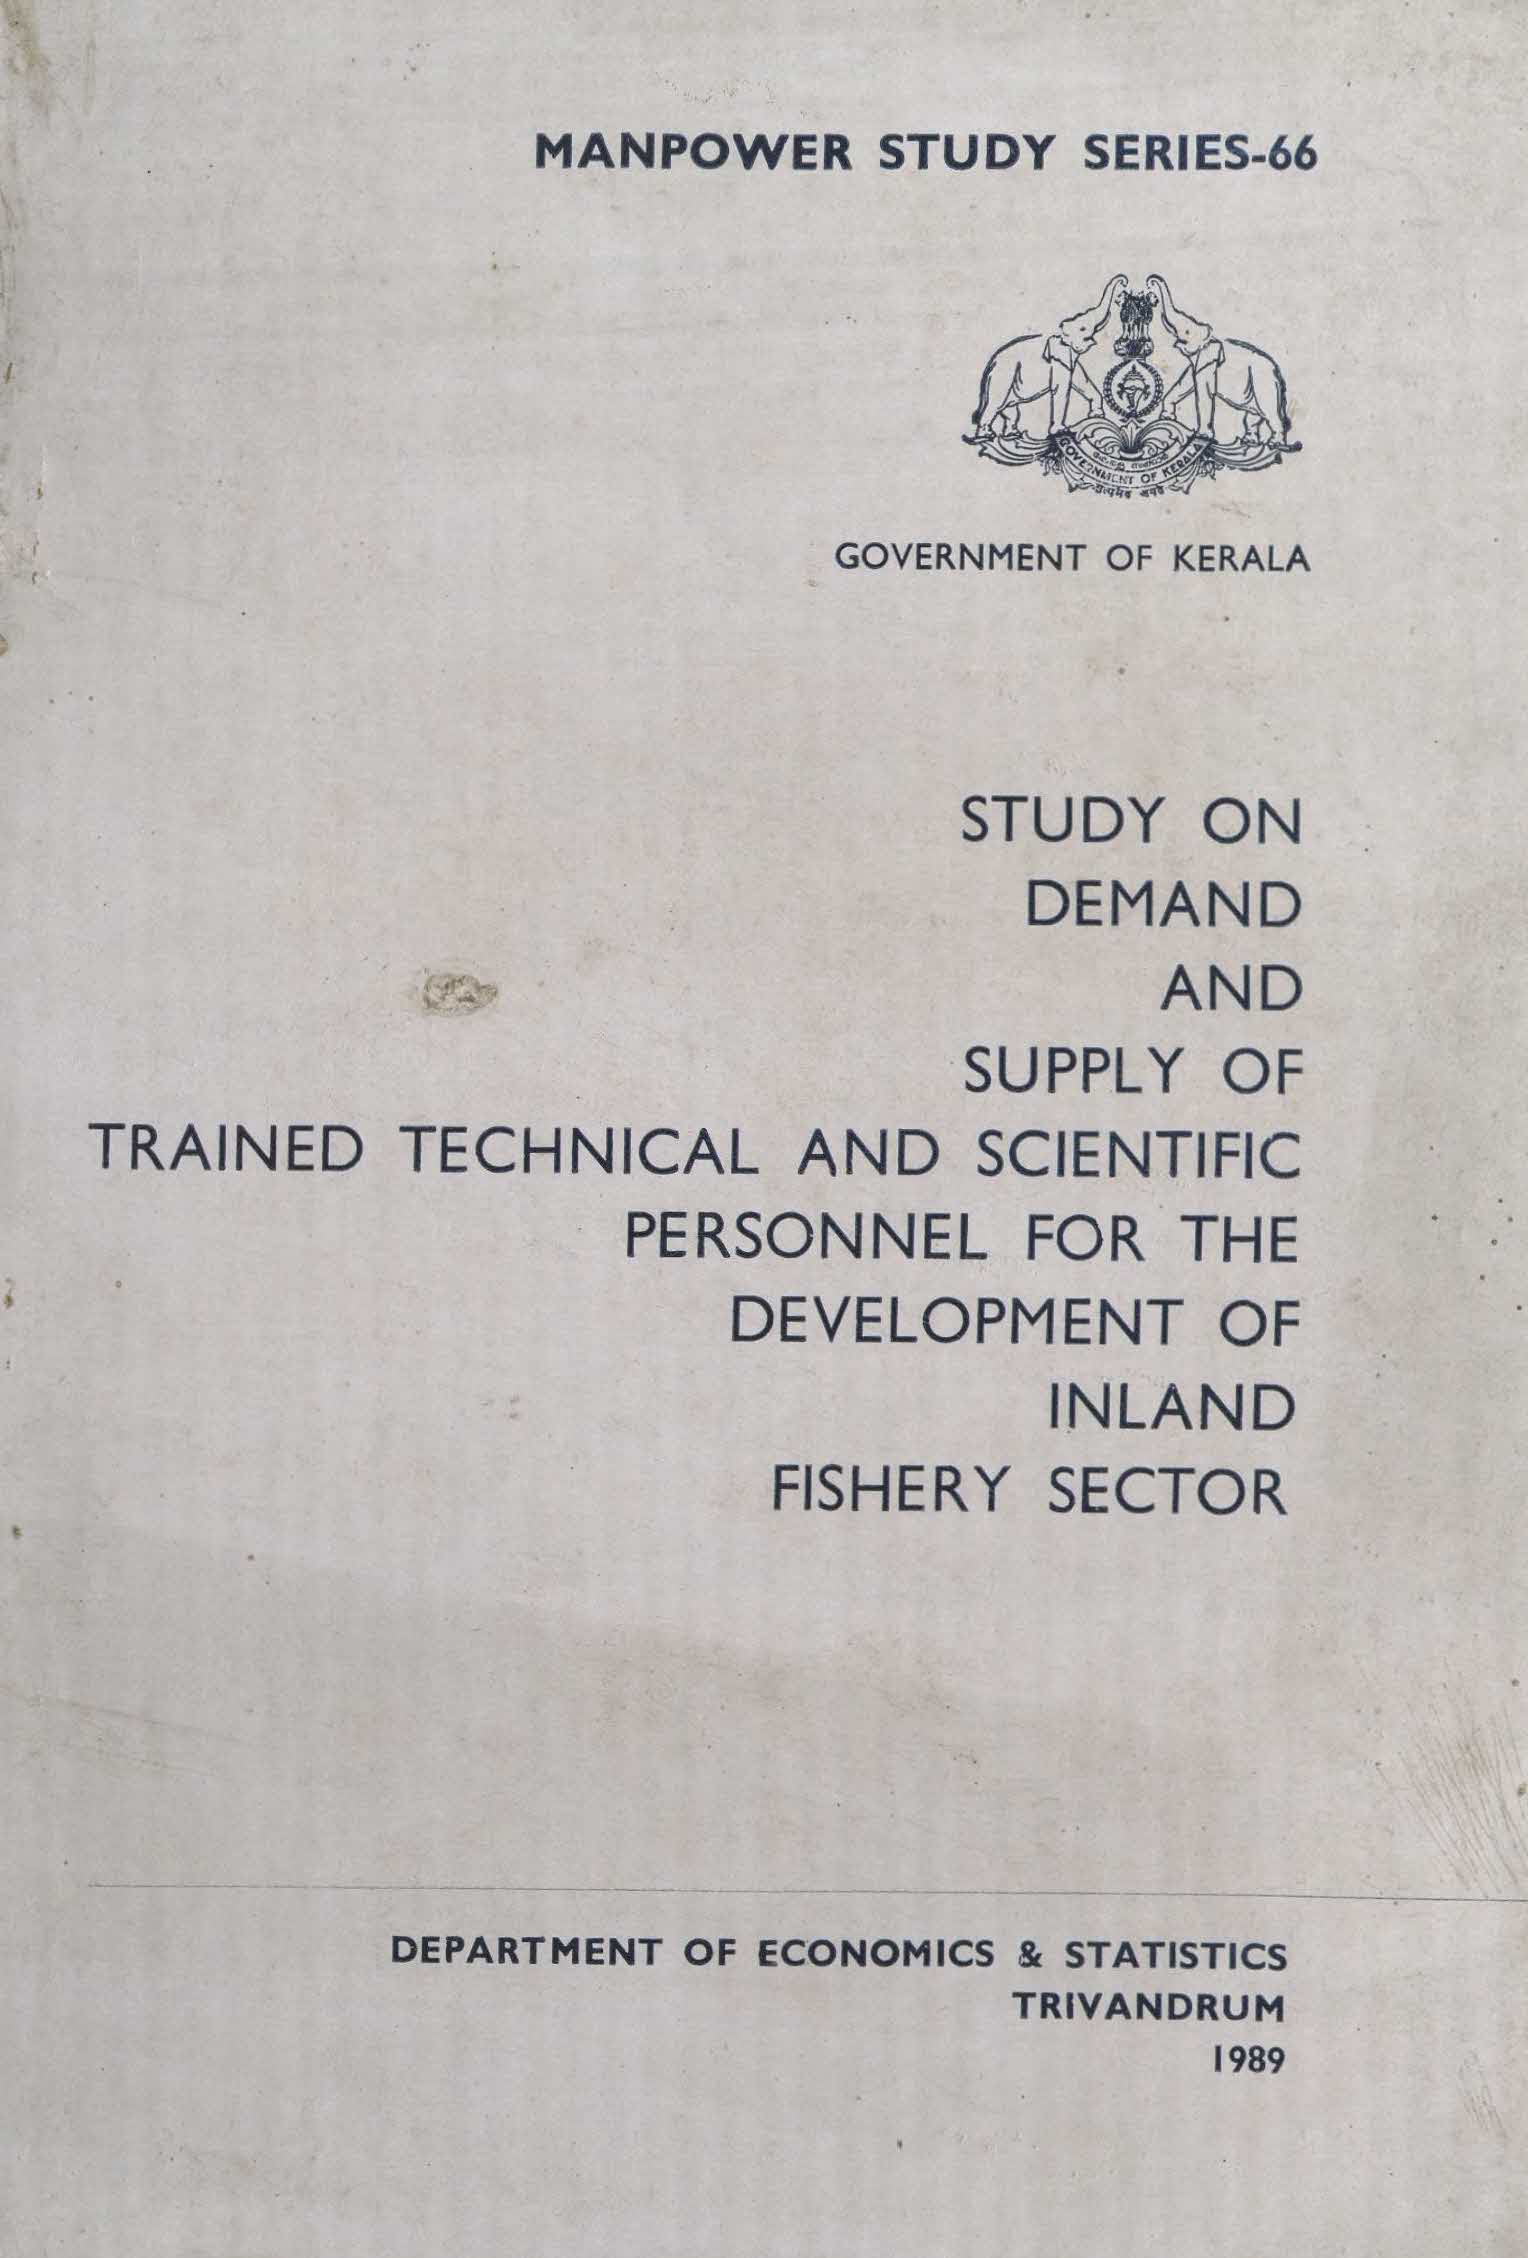 STUDY ON DEMAND AND SUPPLY OF TRAINED TECHNICAL AND SCIENTIFIC PERSONNEL FOR THE DEVELOPMENT OF INLAND FISHERY SECTOR